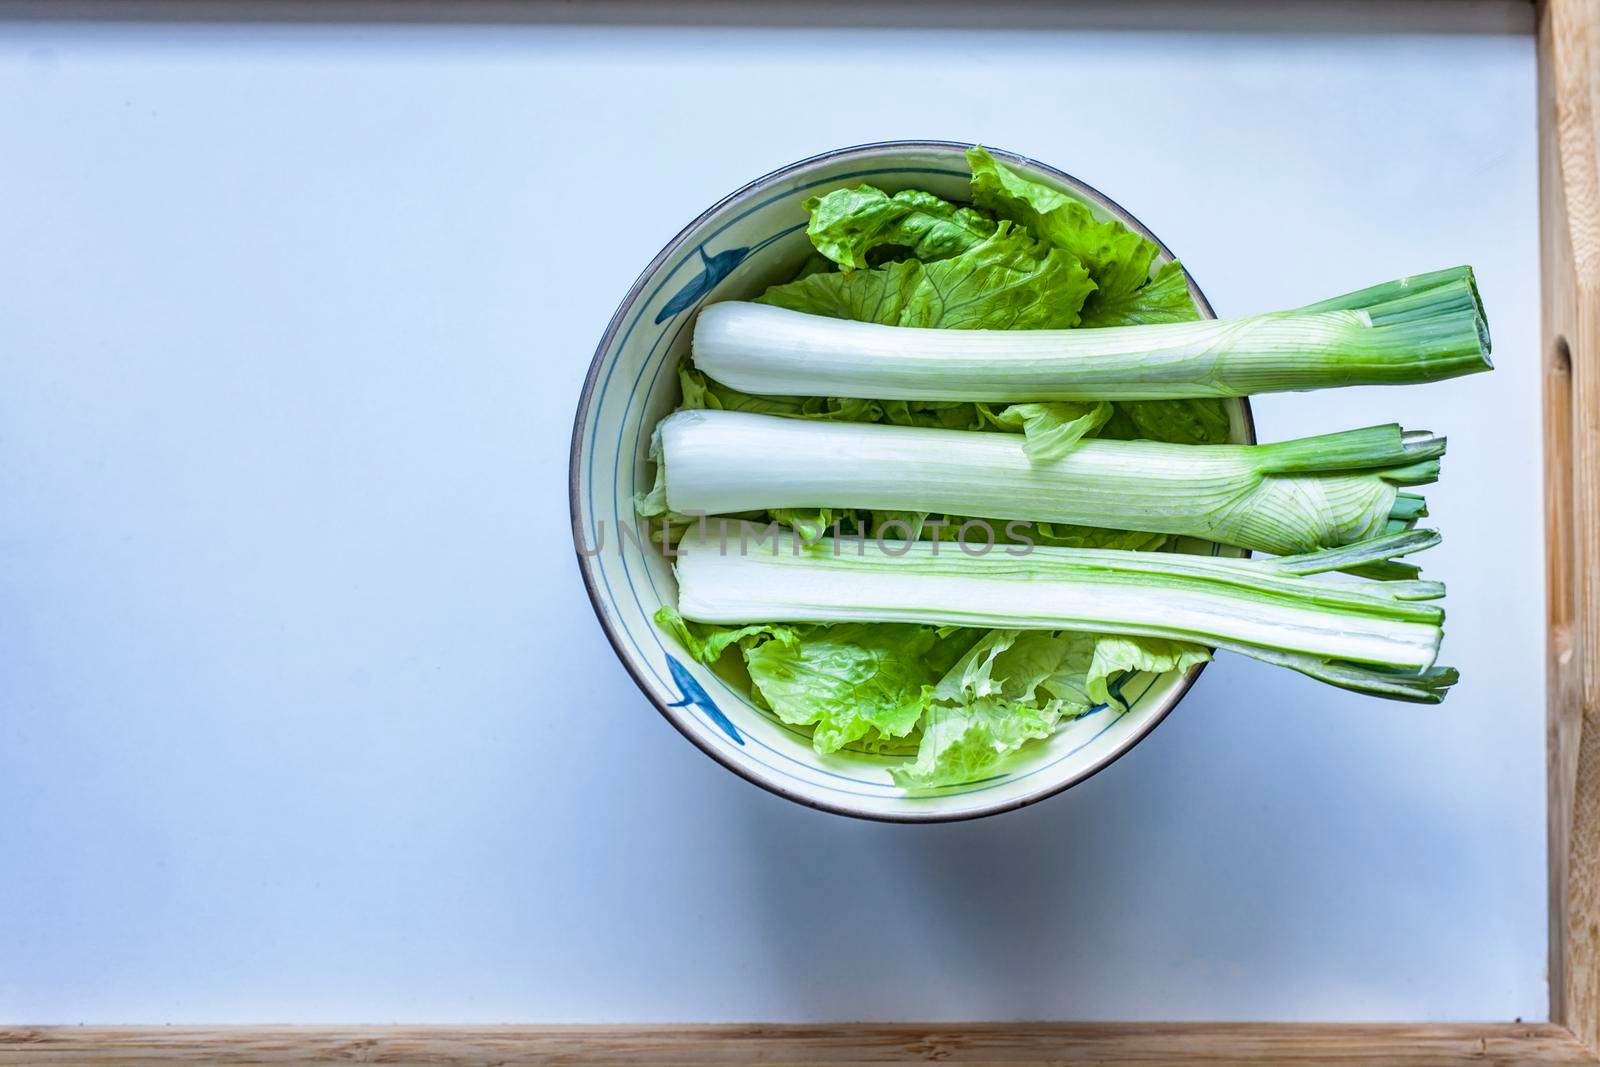 Green onion and lettuce in a bowl by zebra